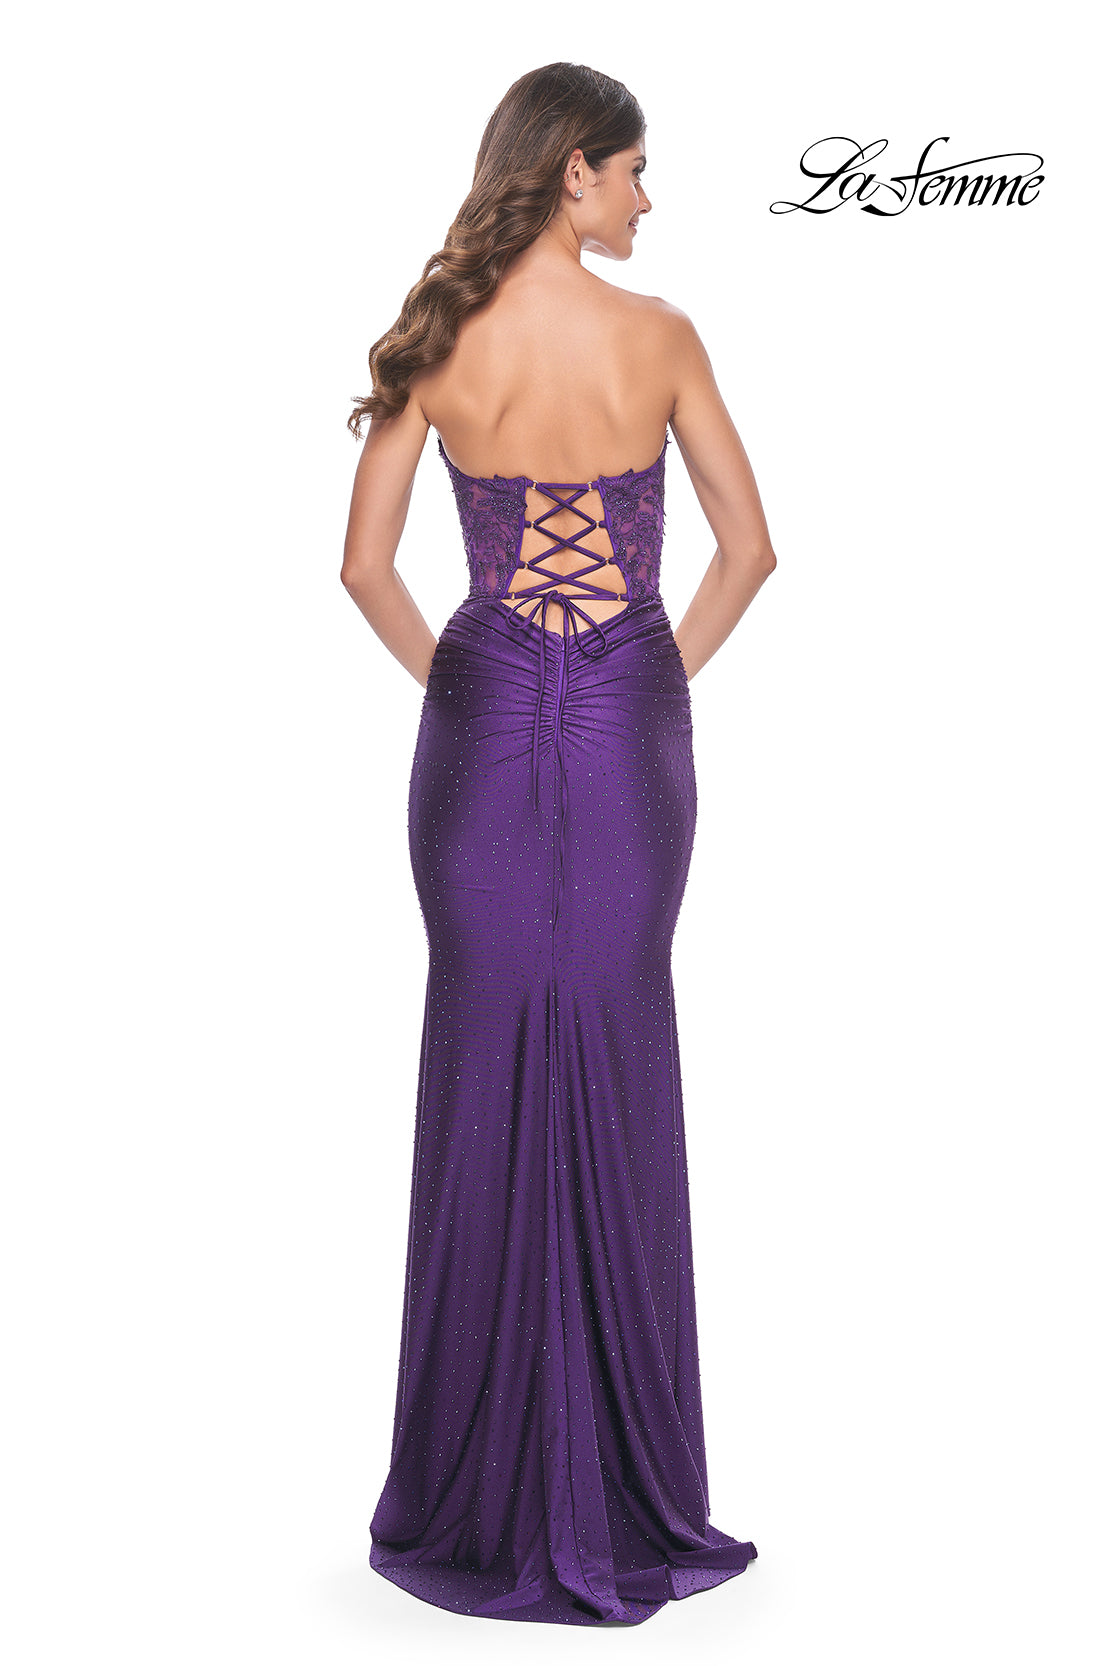 La-Femme-32254-Sweetheart-Neckline-Lace-up-Back-Corset-Lace-Jersey-Fitted-Royal-Purple-Evening-Dress-B-Chic-Fashions-Prom-Dress